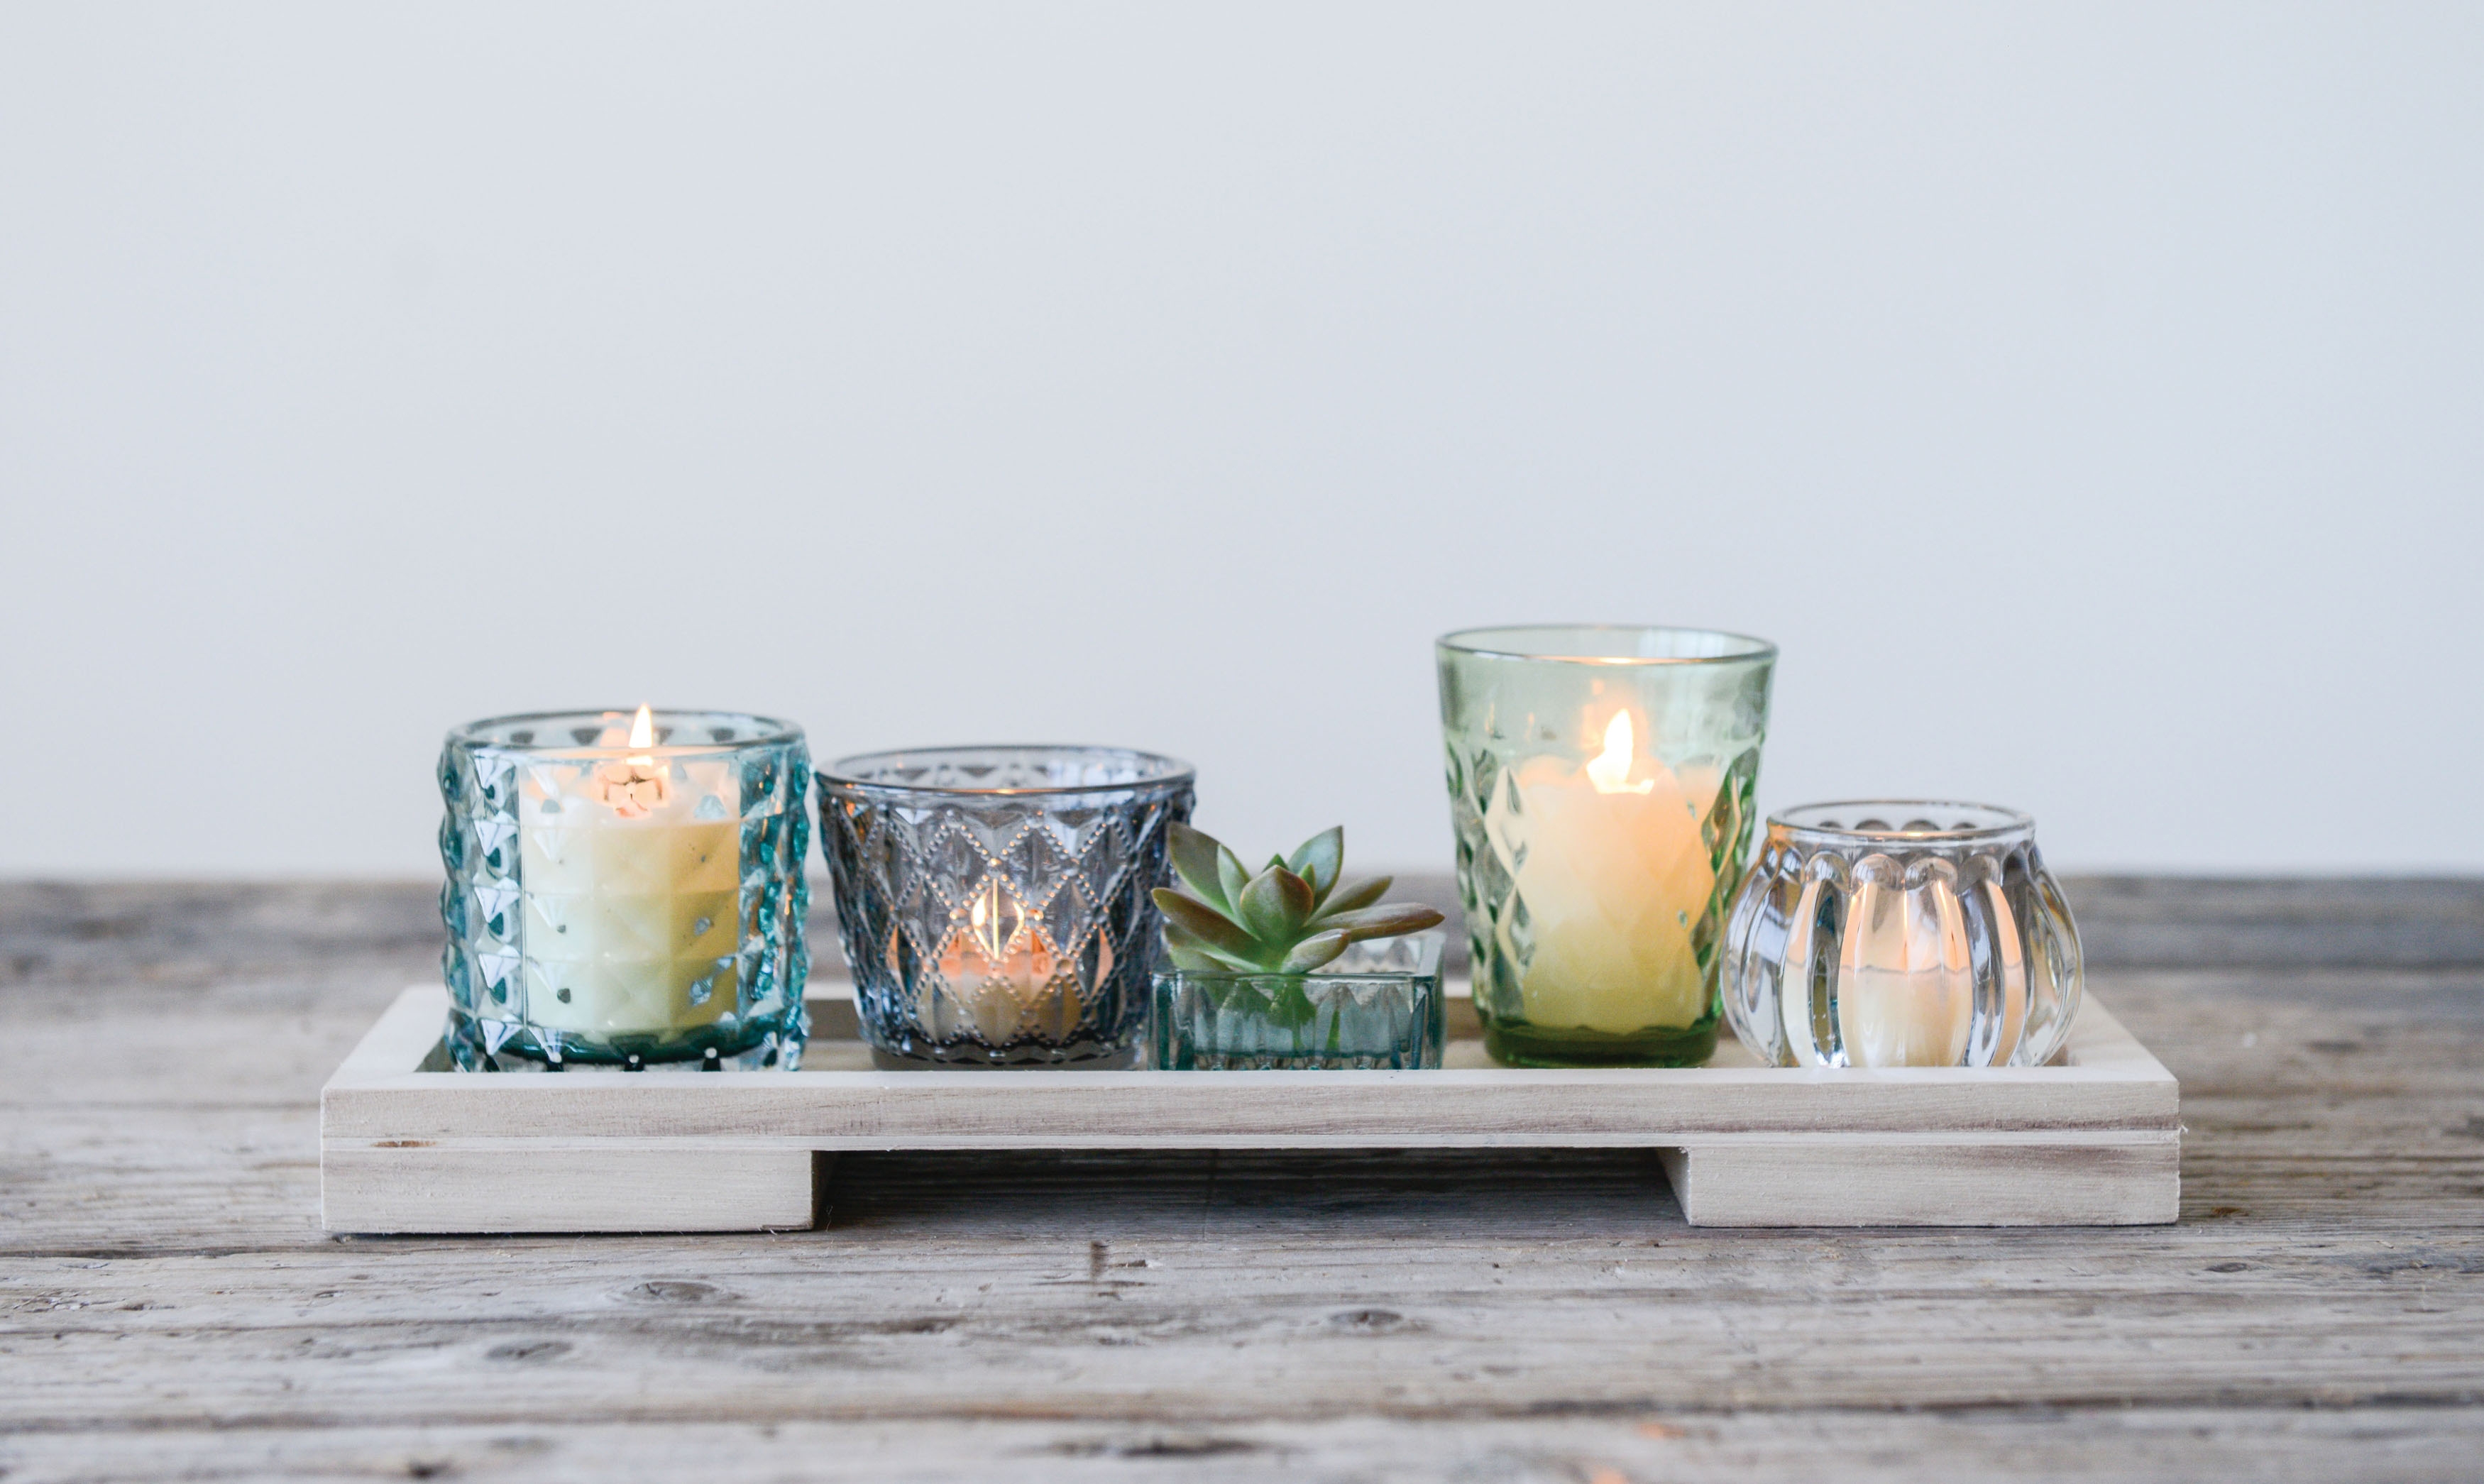 Glass Votive/Tealight Holders on Wood Tray (Set of 5 Pieces) - Image 1